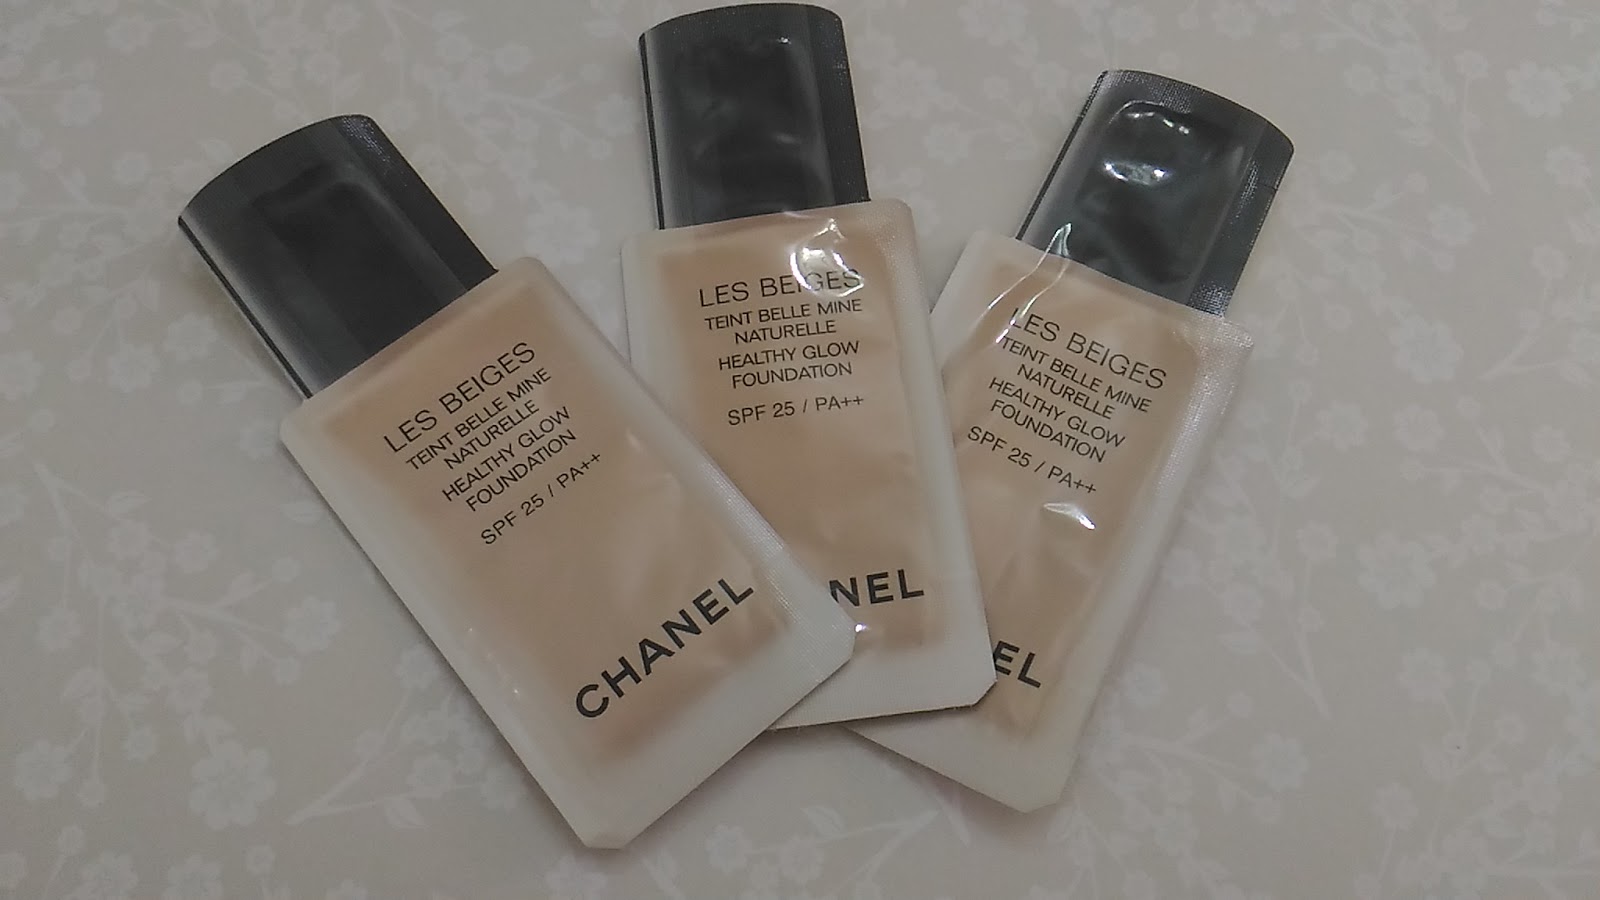 All About That Base: CHANEL Les Beiges Healthy Glow Foundation SPF25/PA++